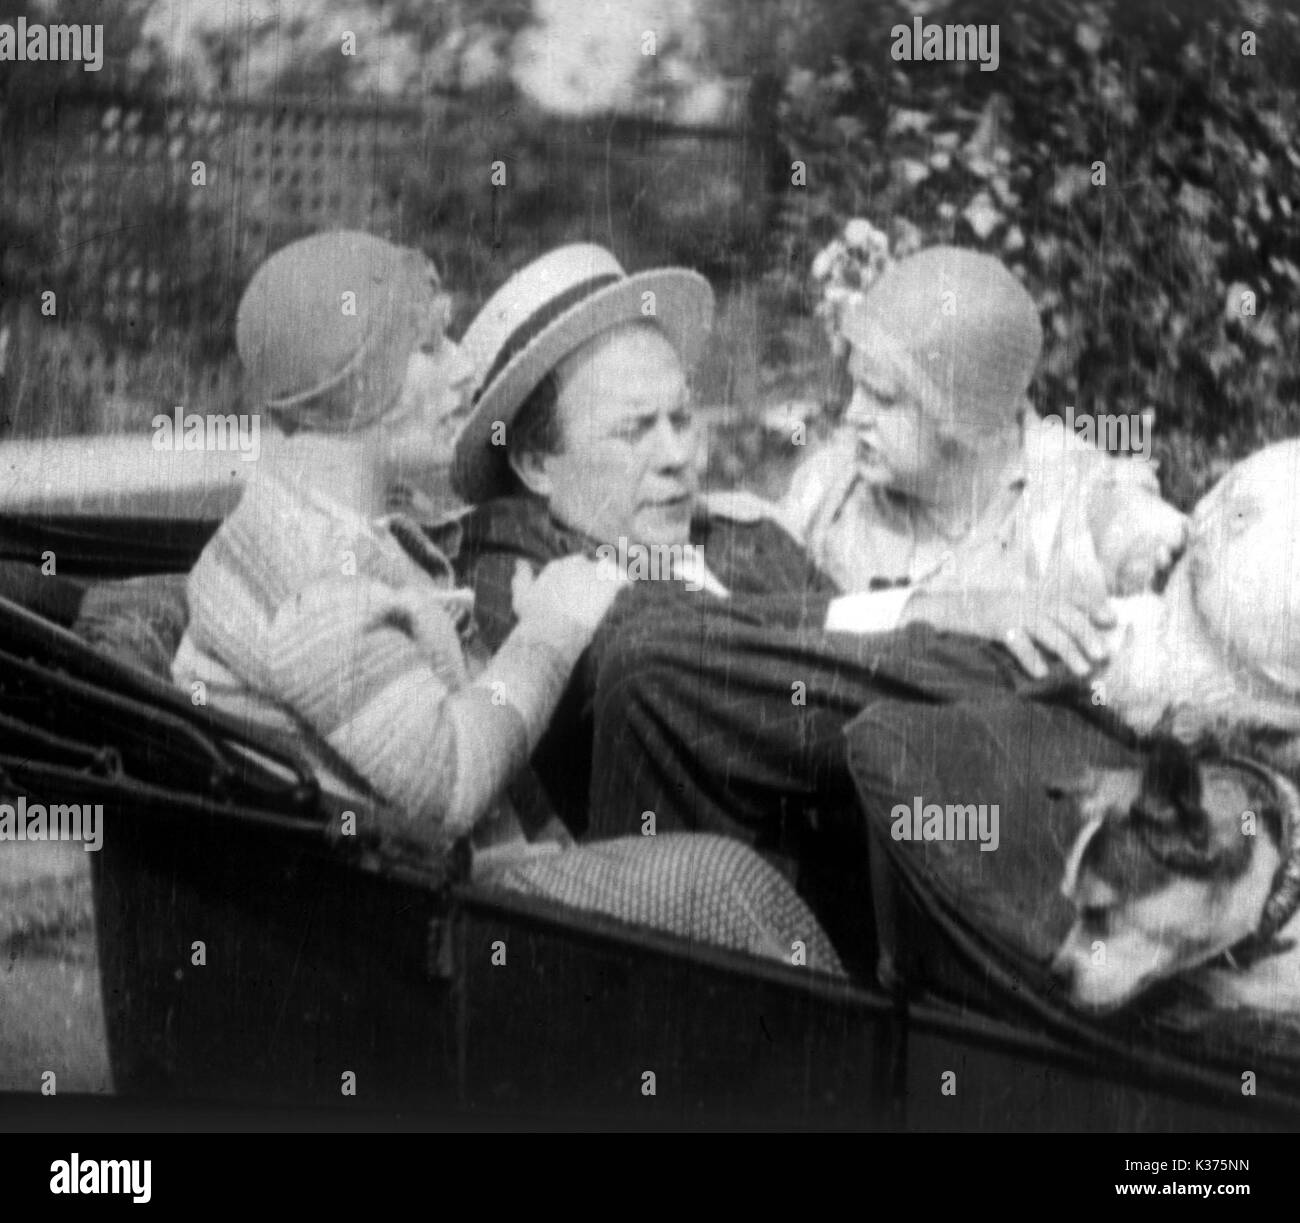 THE PERFECT DAY EDGAR KENNEDY   THE PERFECT DAY EDGAR KENNEDY     Date: 1929 Stock Photo